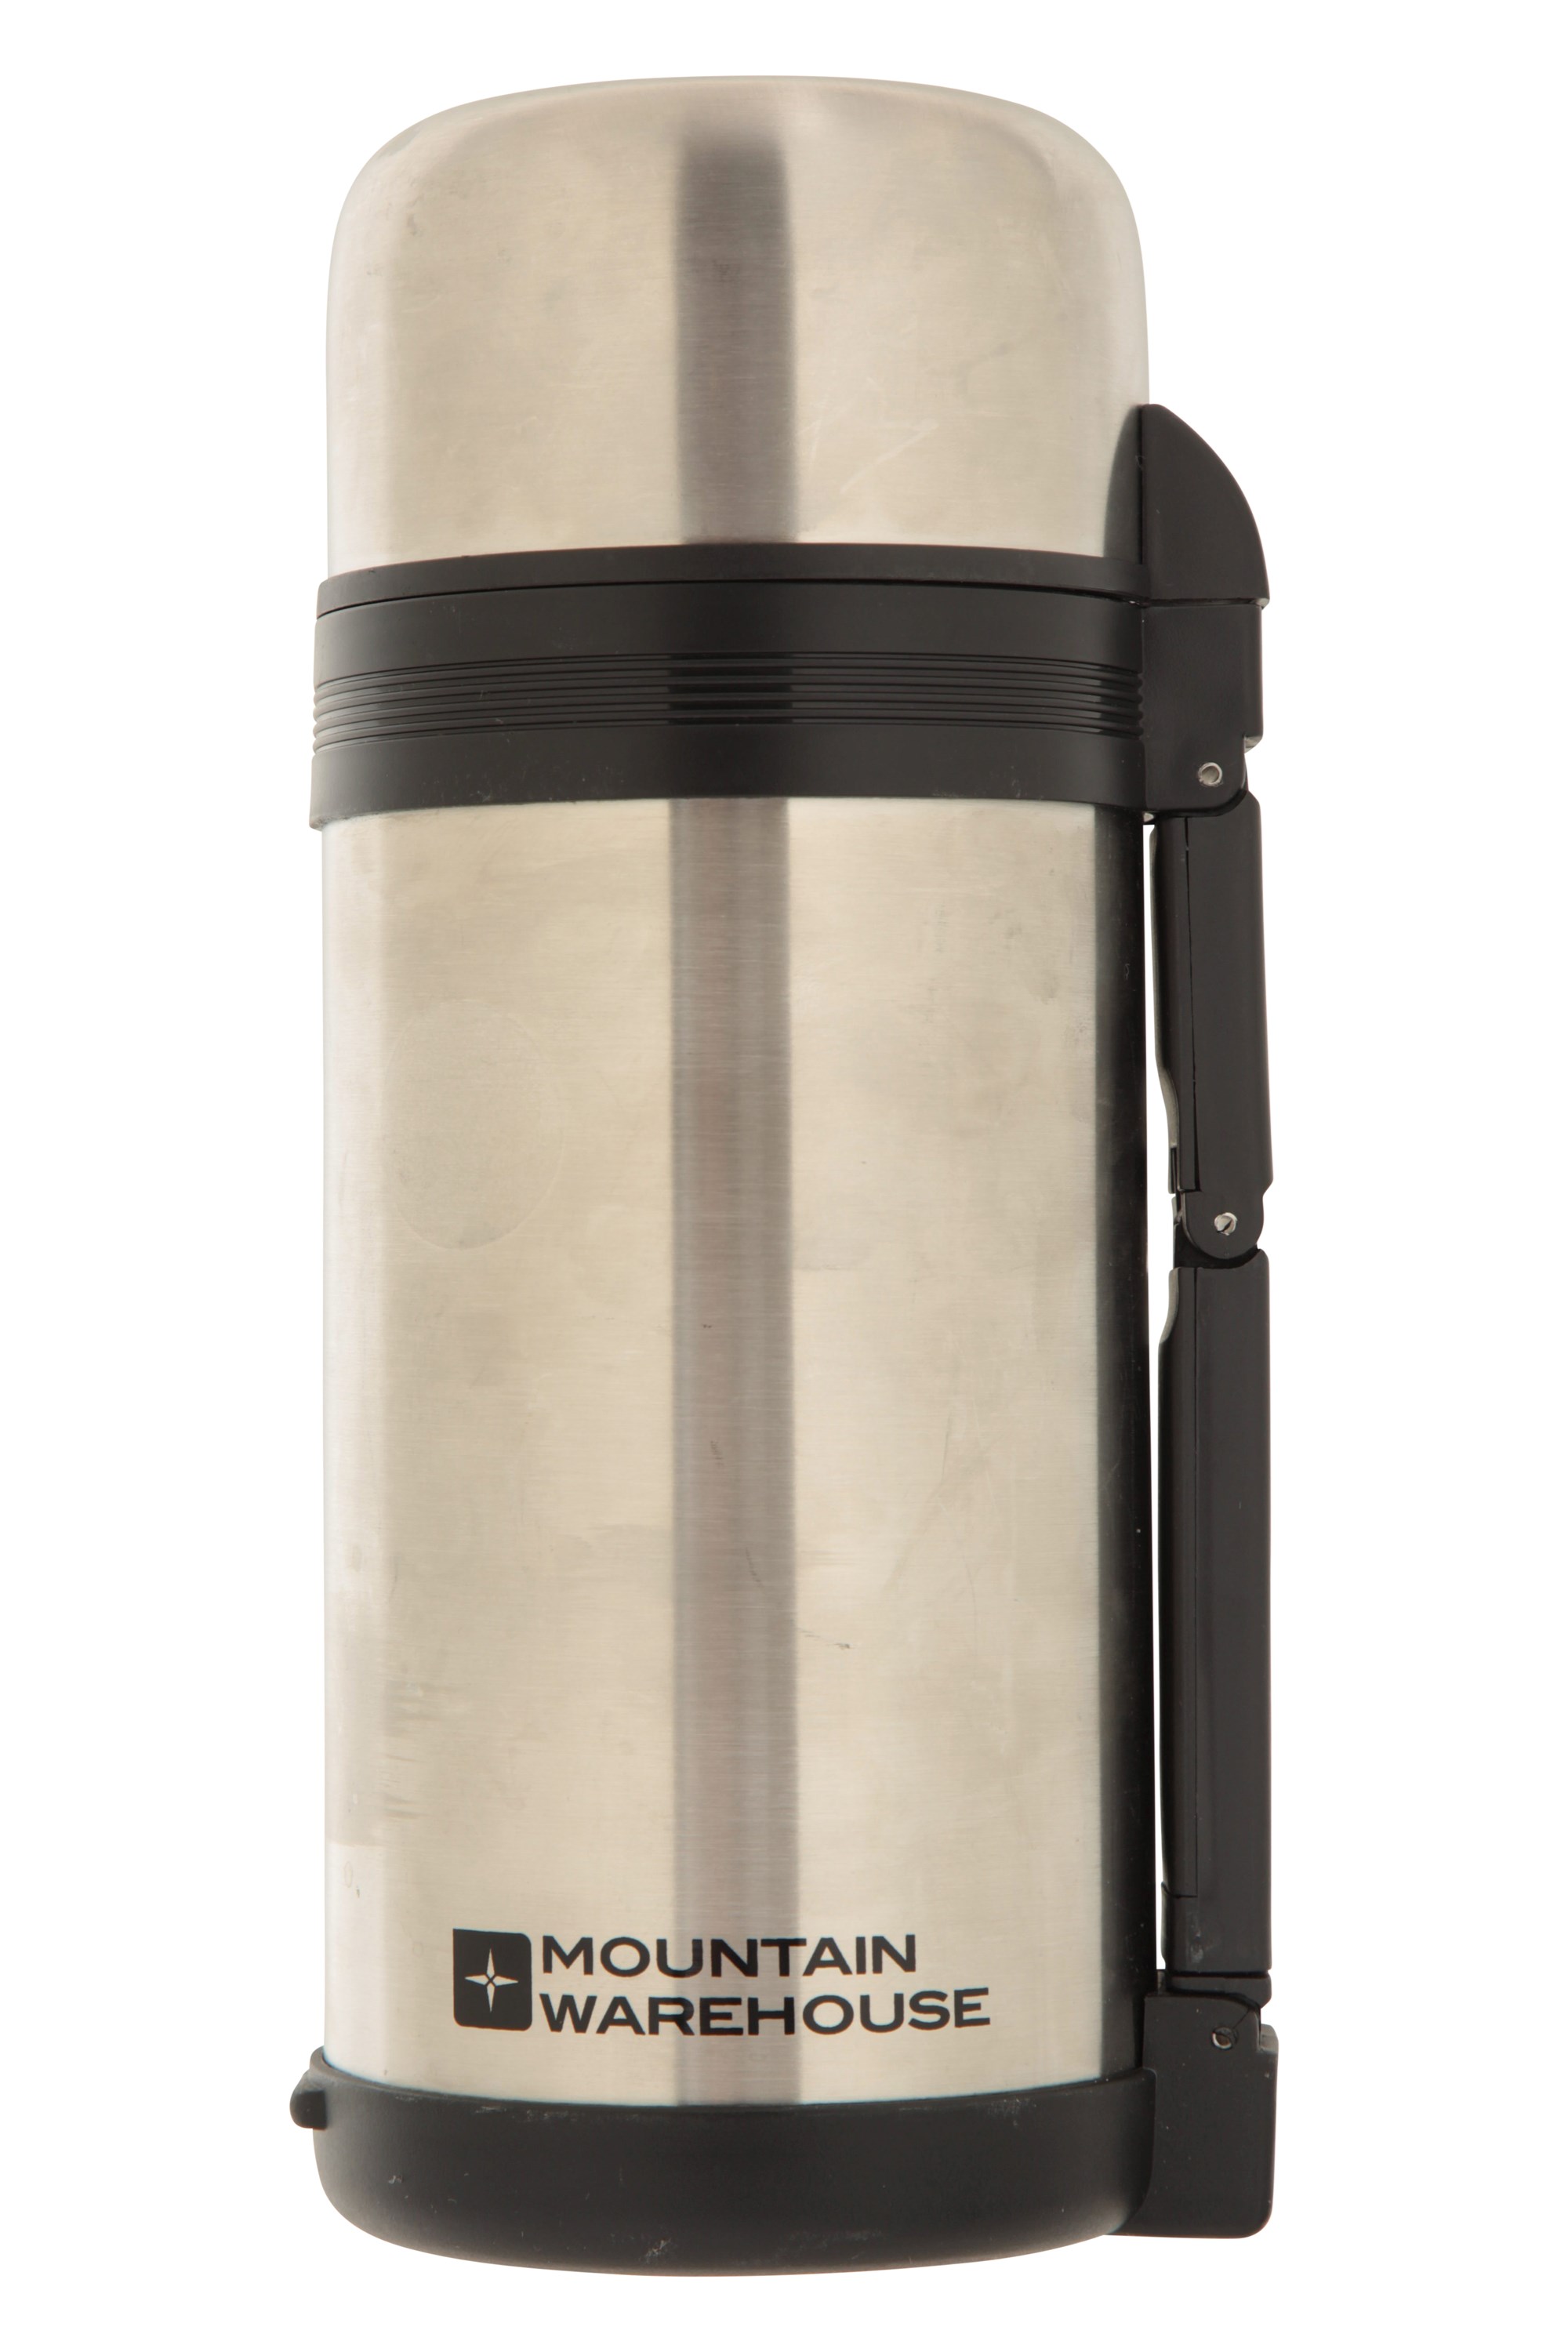 300ml Thermos Food Flask